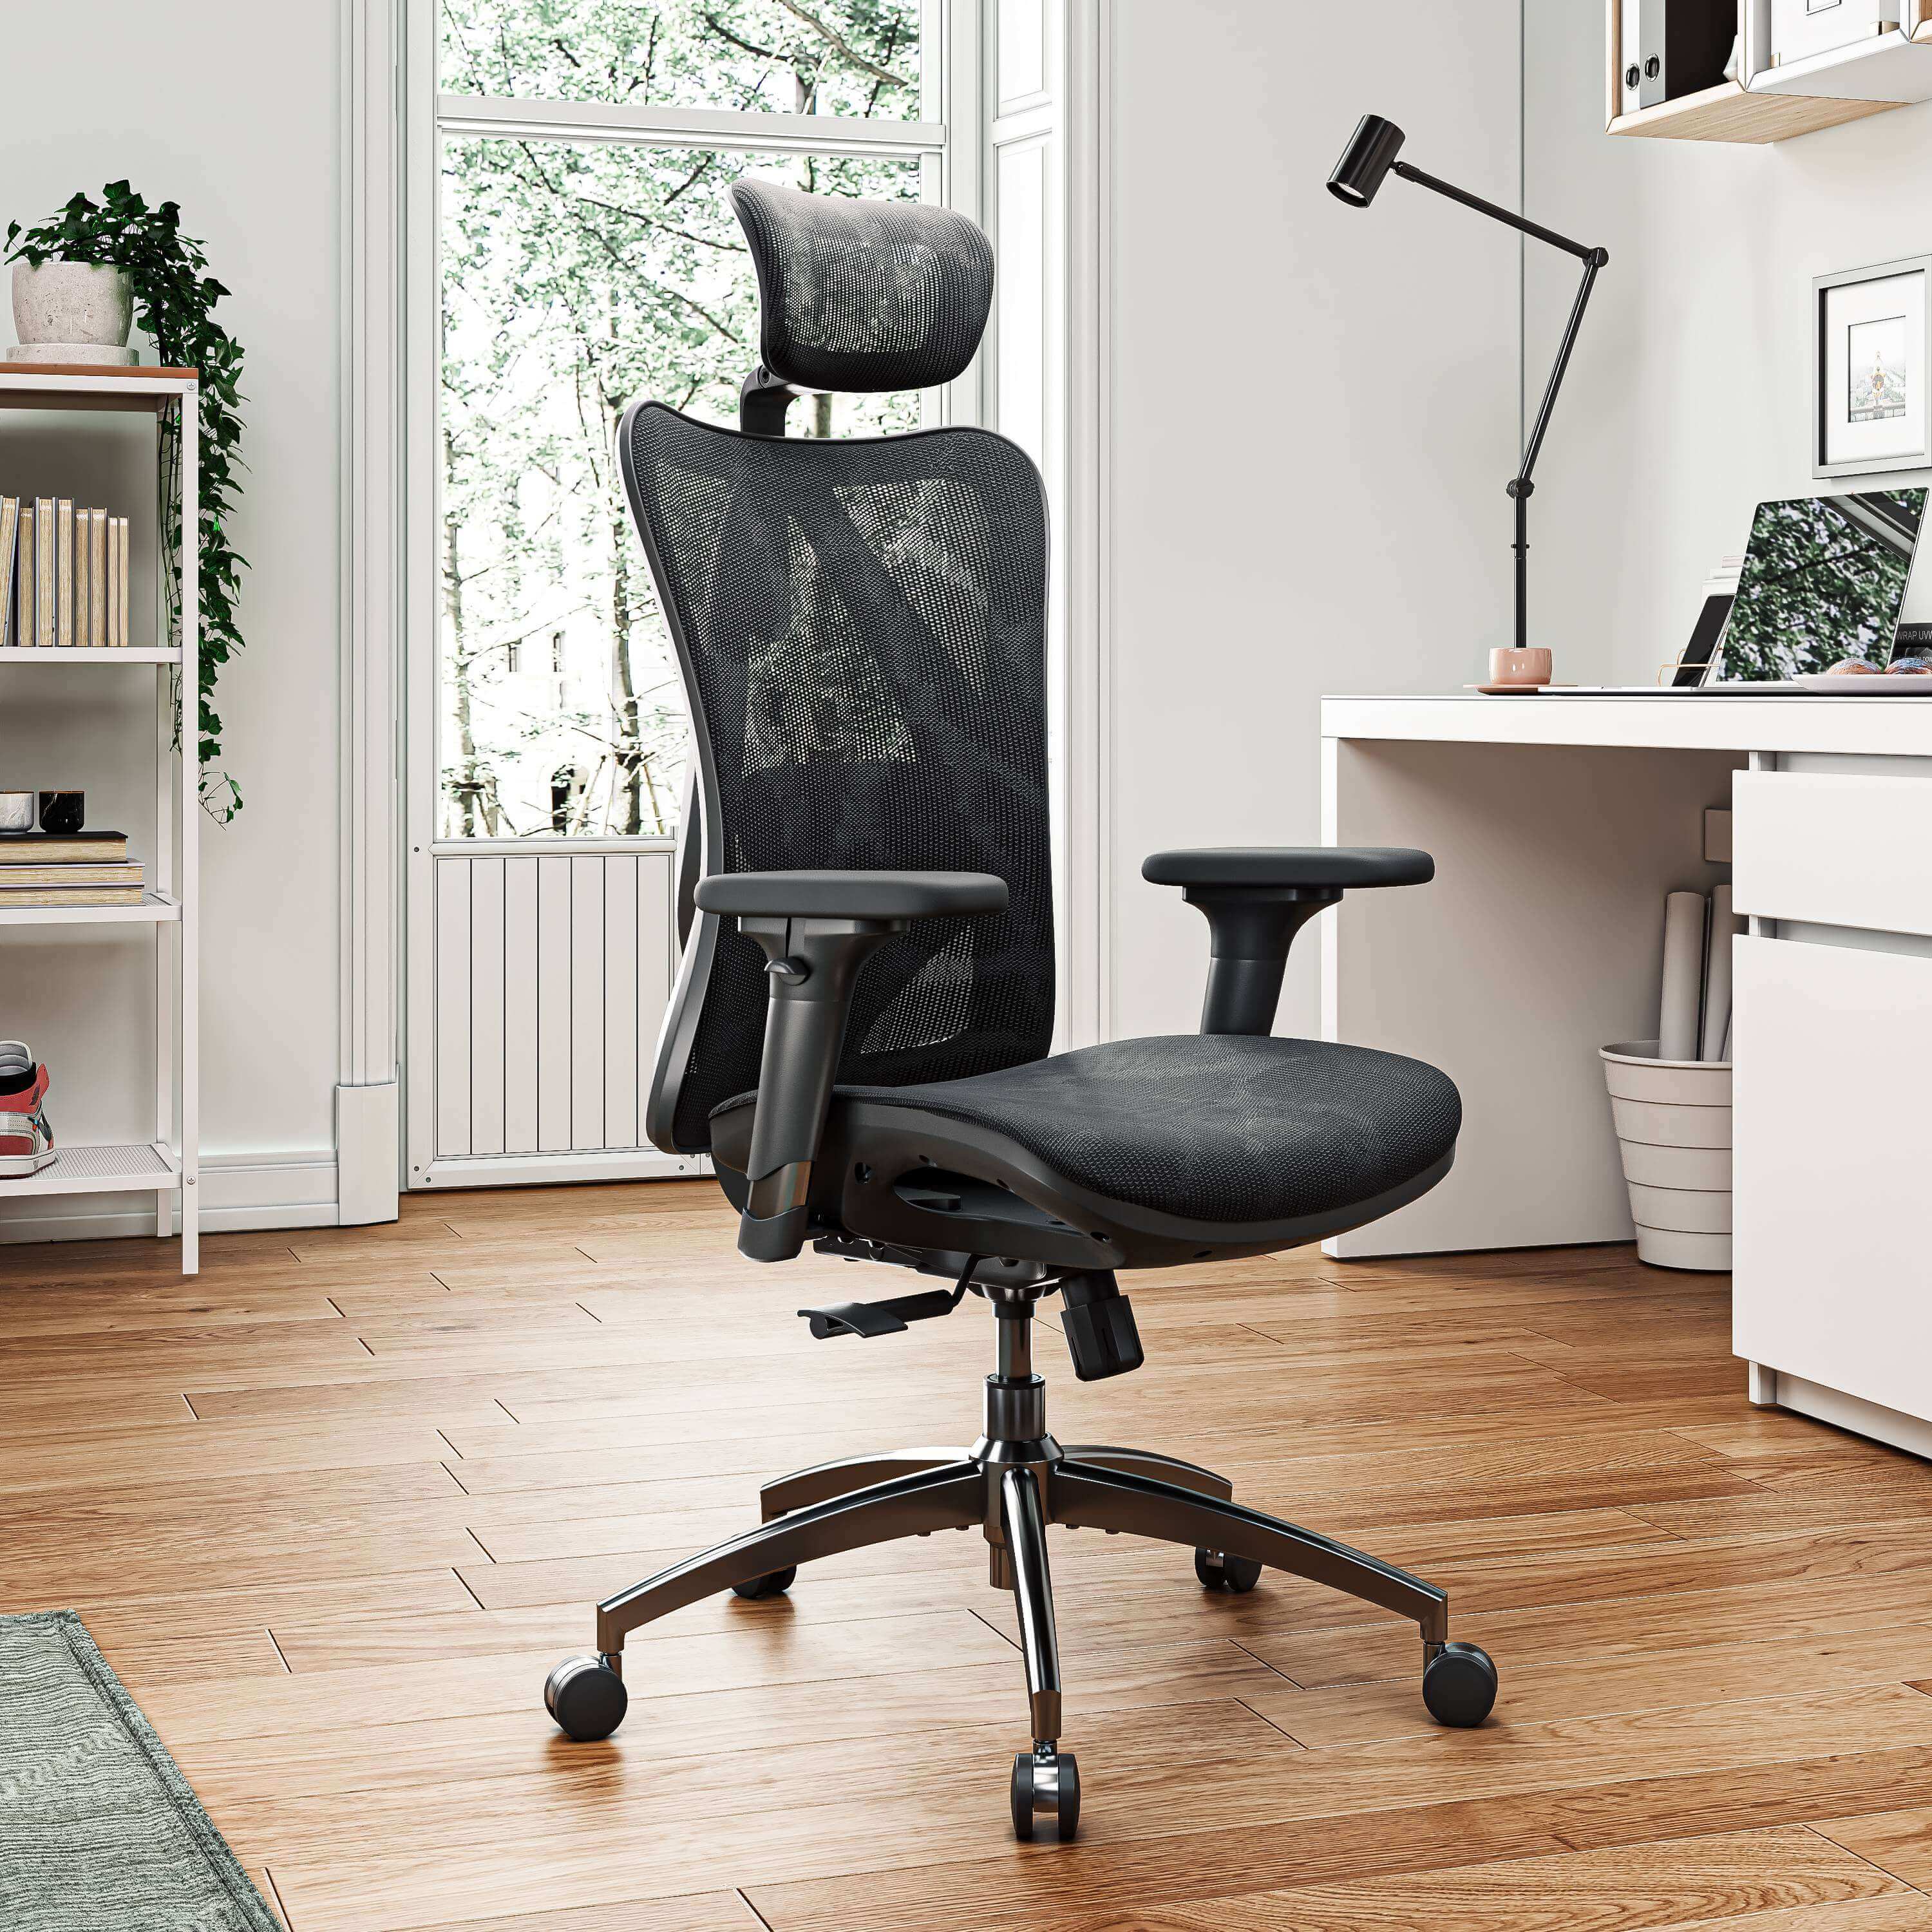 Pre Sale - Sihoo M57 Full Mesh Breathable Office Chair for Sedentary Lifestyle